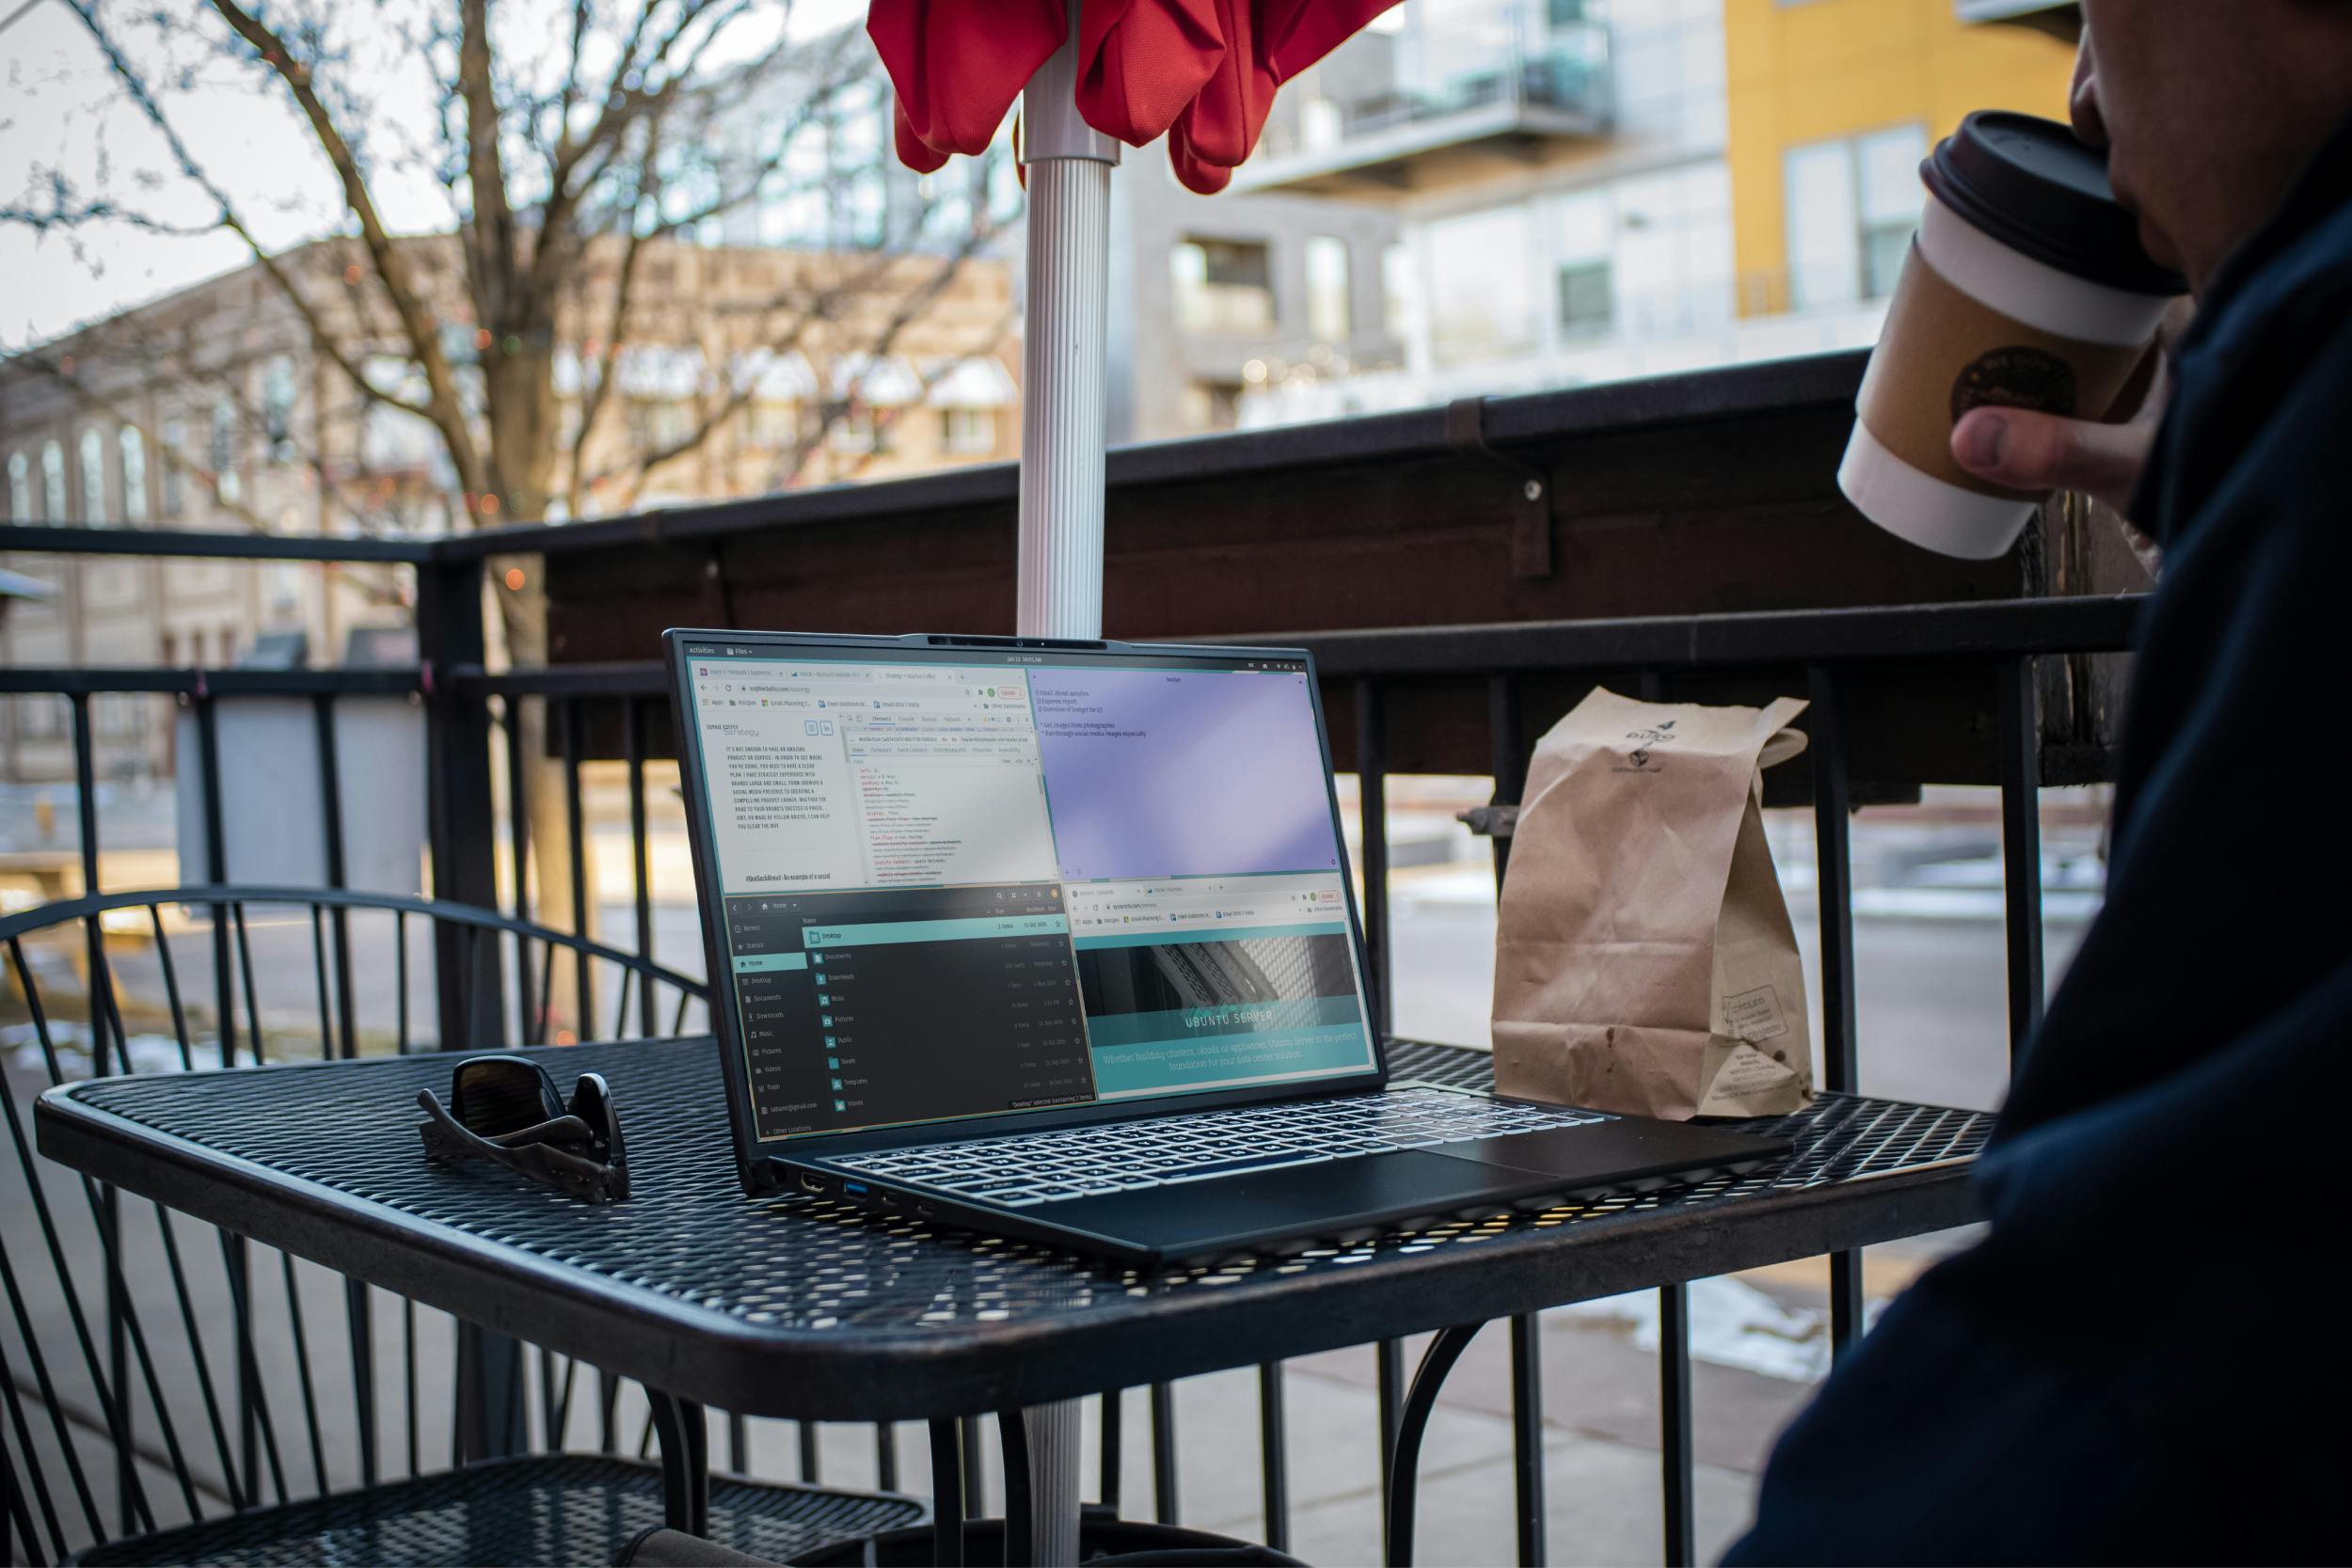 A person working in the outdoor seating area of a cafe.